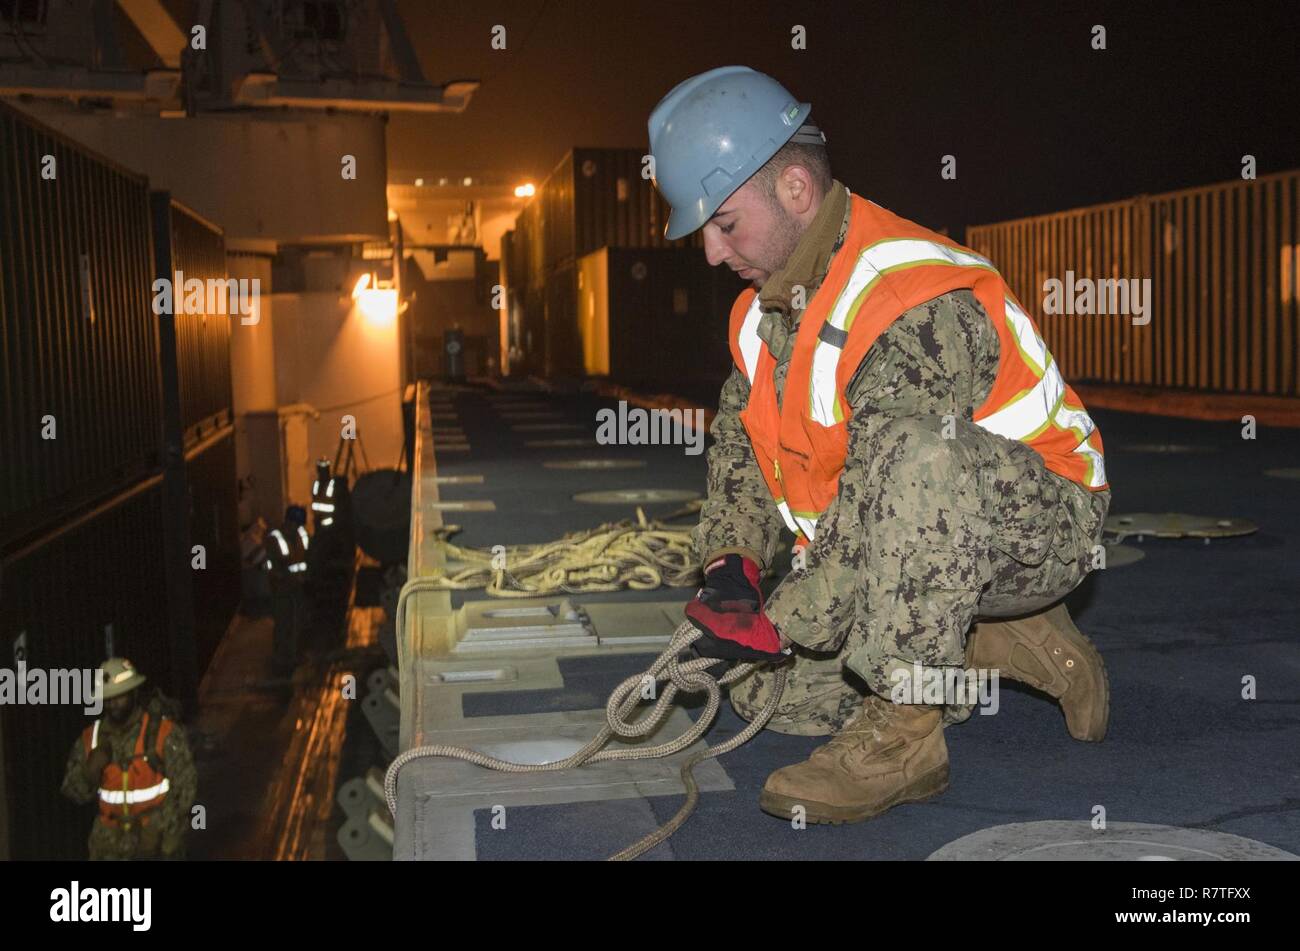 POHANG, Republic of Korea (Apr. 9, 2017) Boatswain Mate Seaman Nicholas Kakoules from Navy Cargo Handling Battalion One secures lines to a beach module for unloading from Navy Maritime Prepositioning Force Ship USNS Pililaau (T-AK 304) using Improved Navy Lighterage System (INLS) while anchored off the coast of Pohang, Republic of Korea during Combined Joint Logistics Over the Shore (CJLOTS) April 9. CJLOTS is a biennial exercise conducted by military and civilian personnel from the United States and the Republic of Korea, training to deliver and redeploy military cargo as a part of the large  Stock Photo